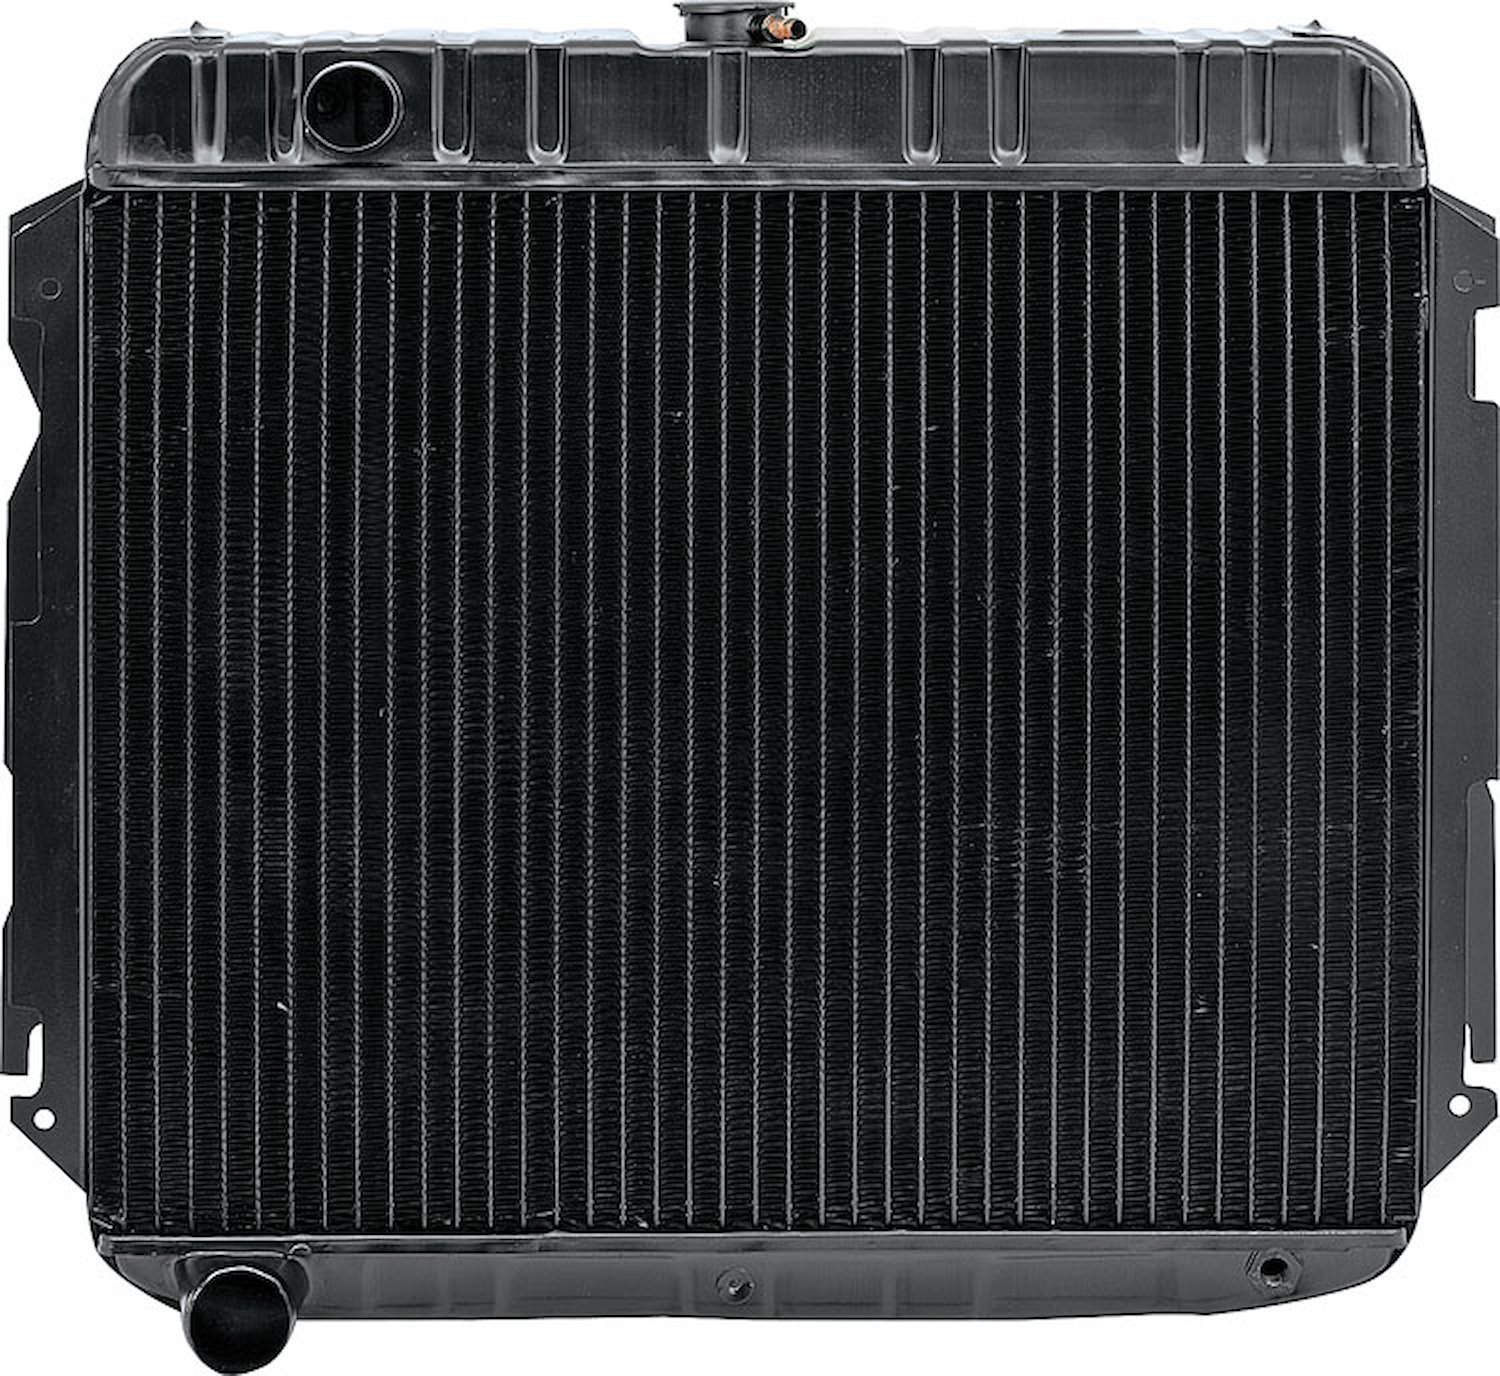 MD2297S Replacement Radiator 1970-72 Mopar B/E-Body Big Block V8 With Standard Trans, 22" Wide, 4 Row